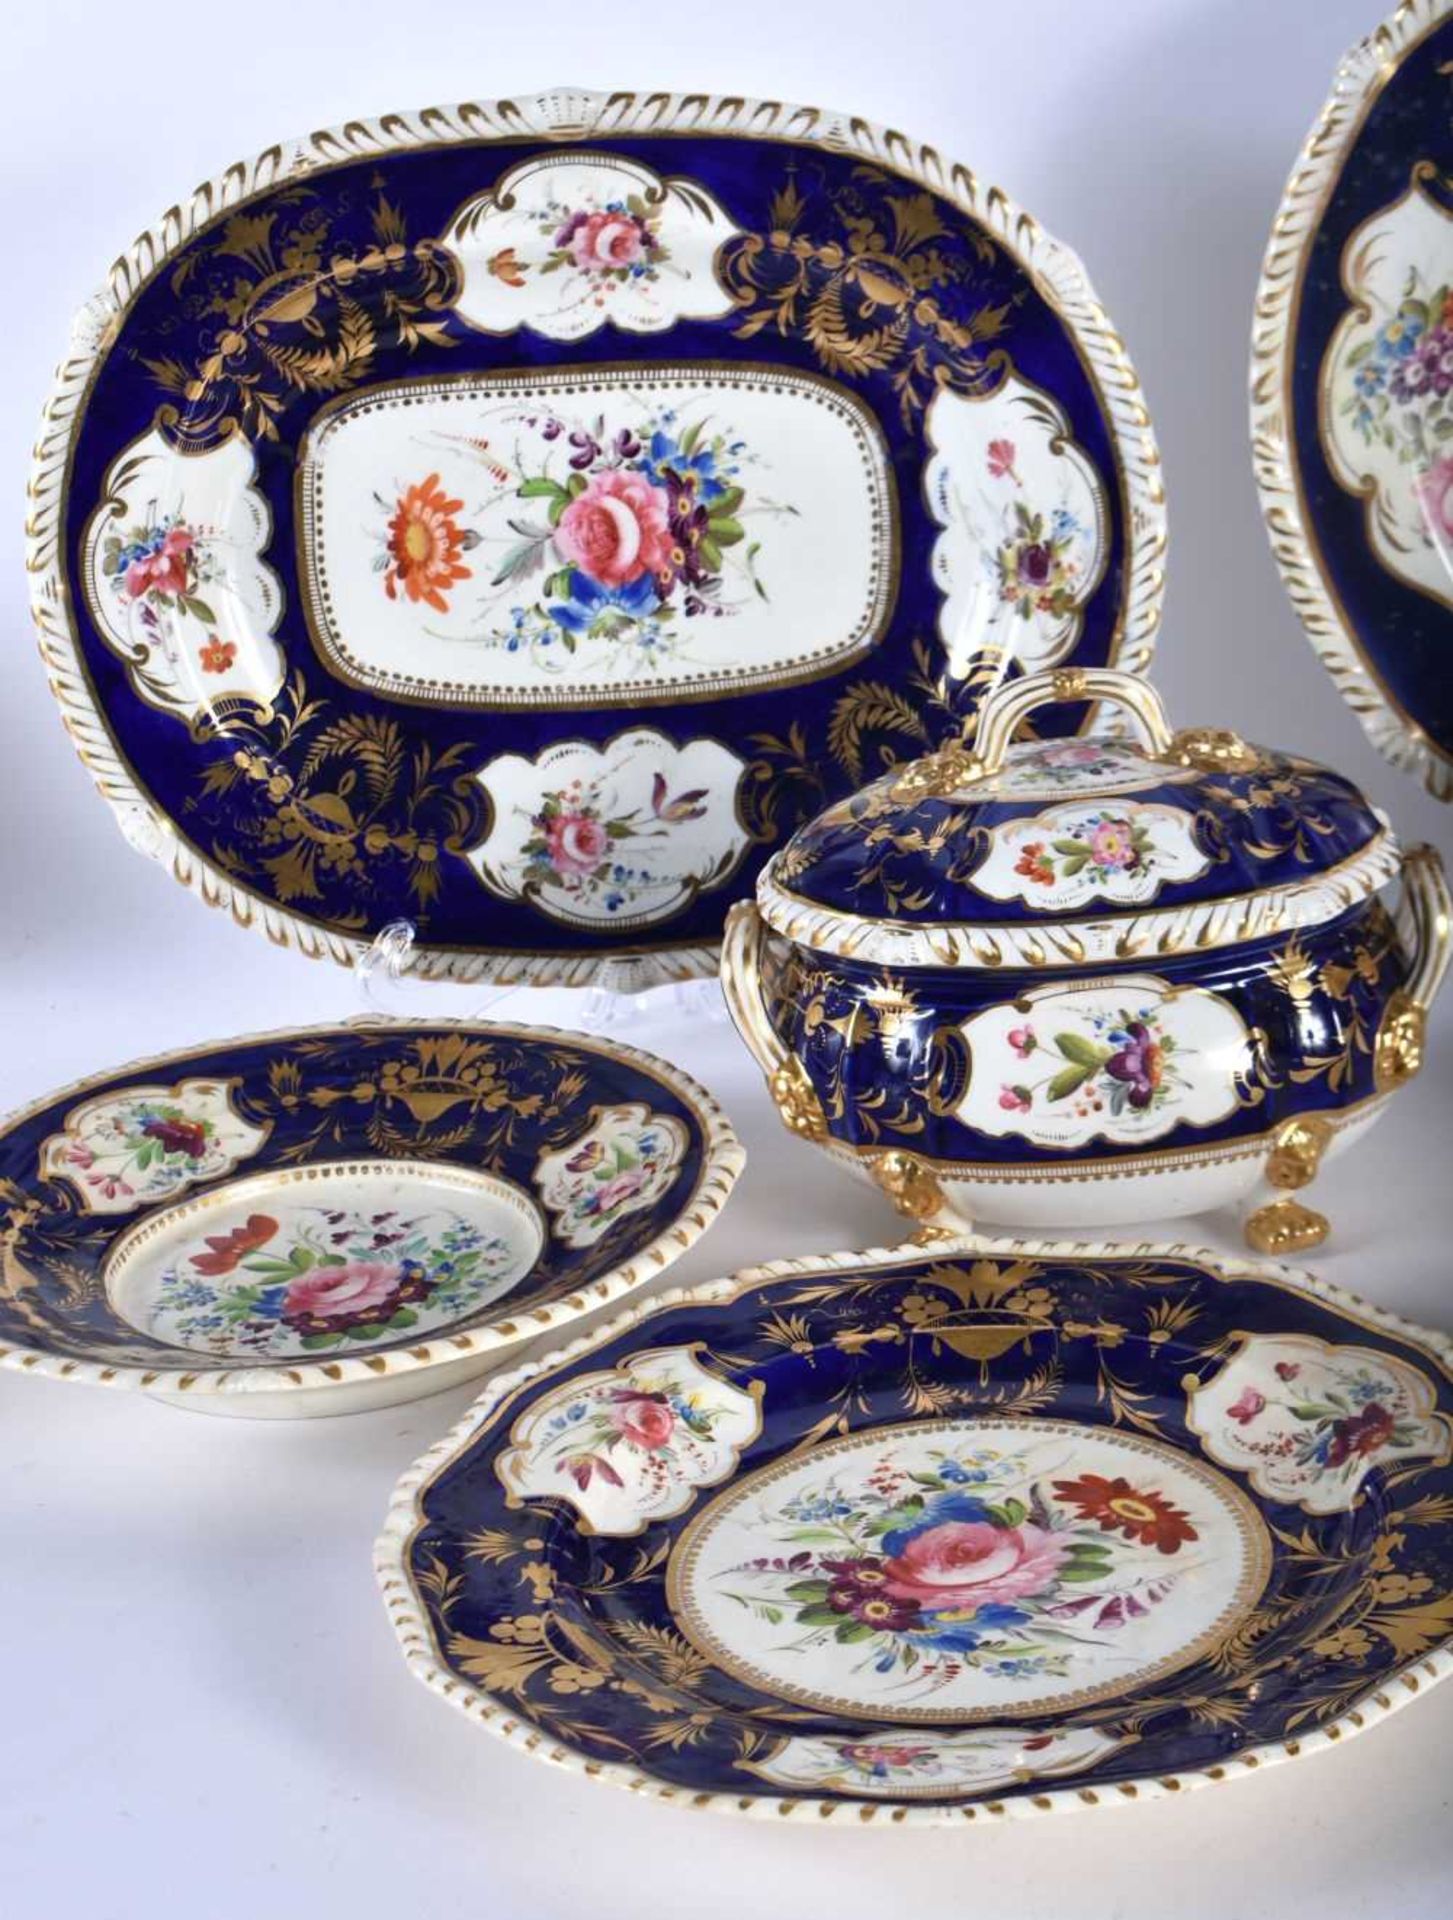 ASSORTED EARLY 19TH CENTURY DERBY WARES including a jug, dessert plates etc. Largest 30 cm wide. ( - Image 2 of 7